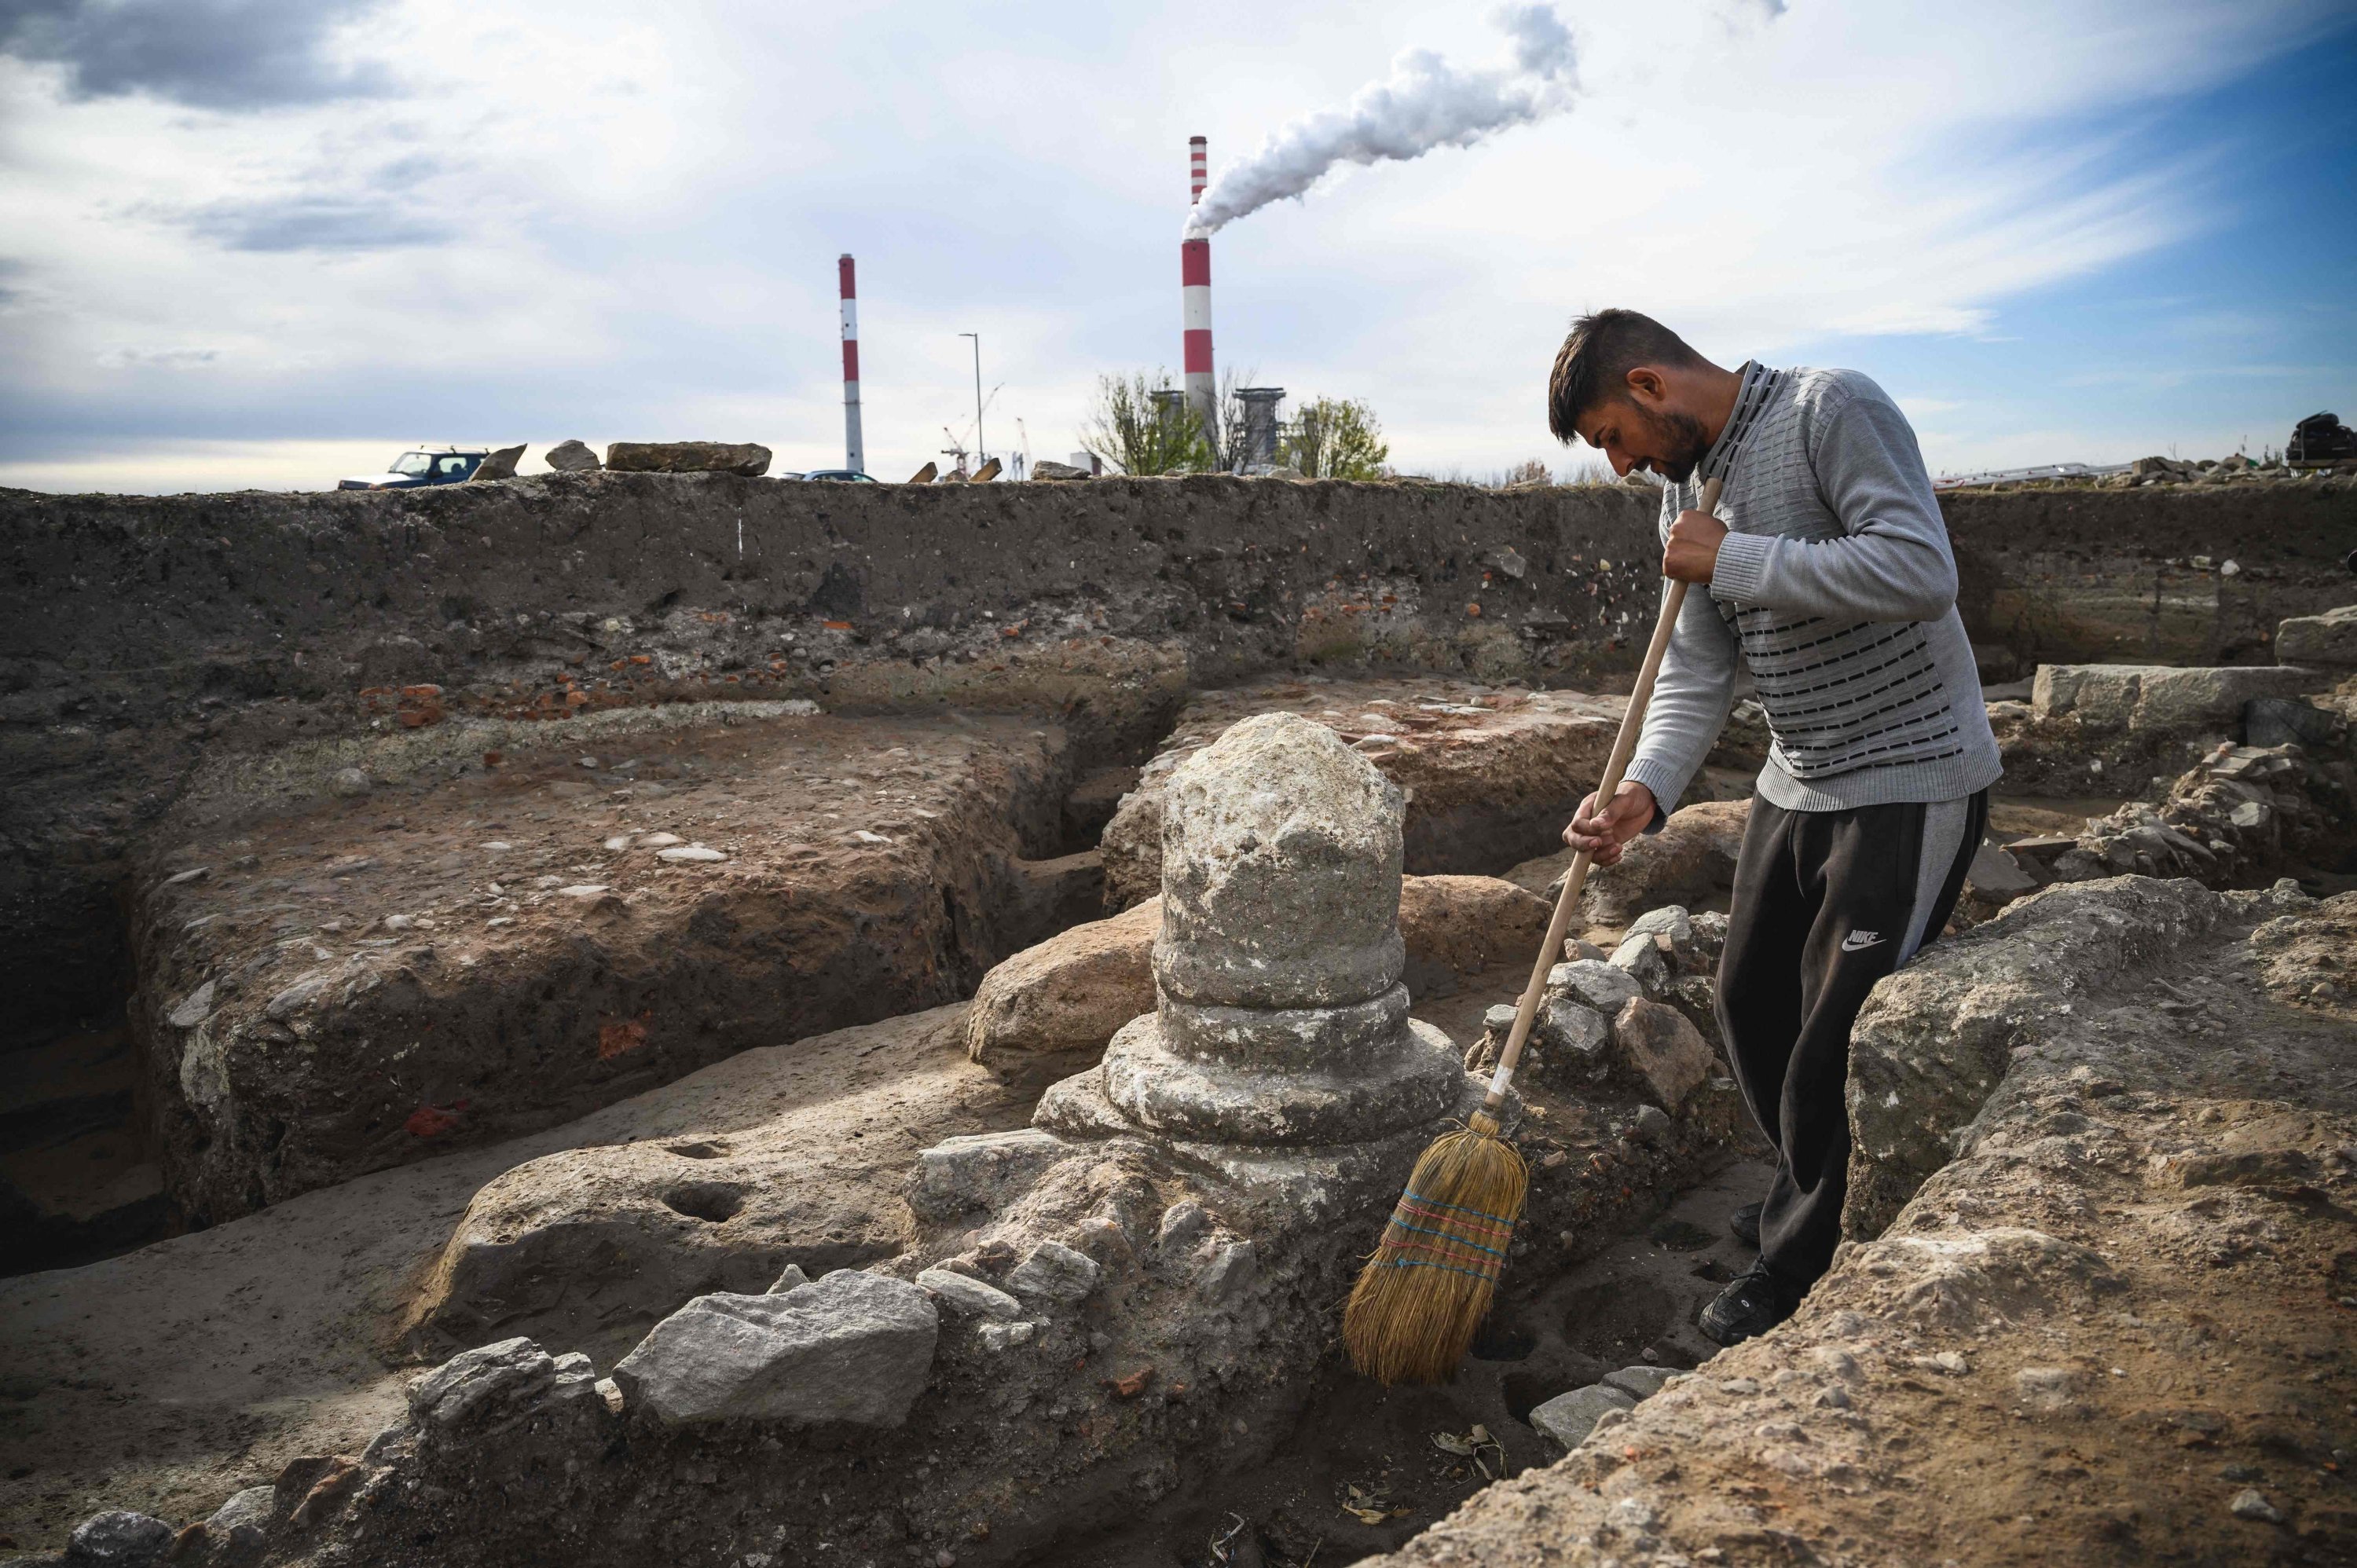 Archeologists work at an archeological site right next to a coal mine and a power plant, in Stari Kostolac, Serbia, Dec. 3, 2021. (AFP Photo)